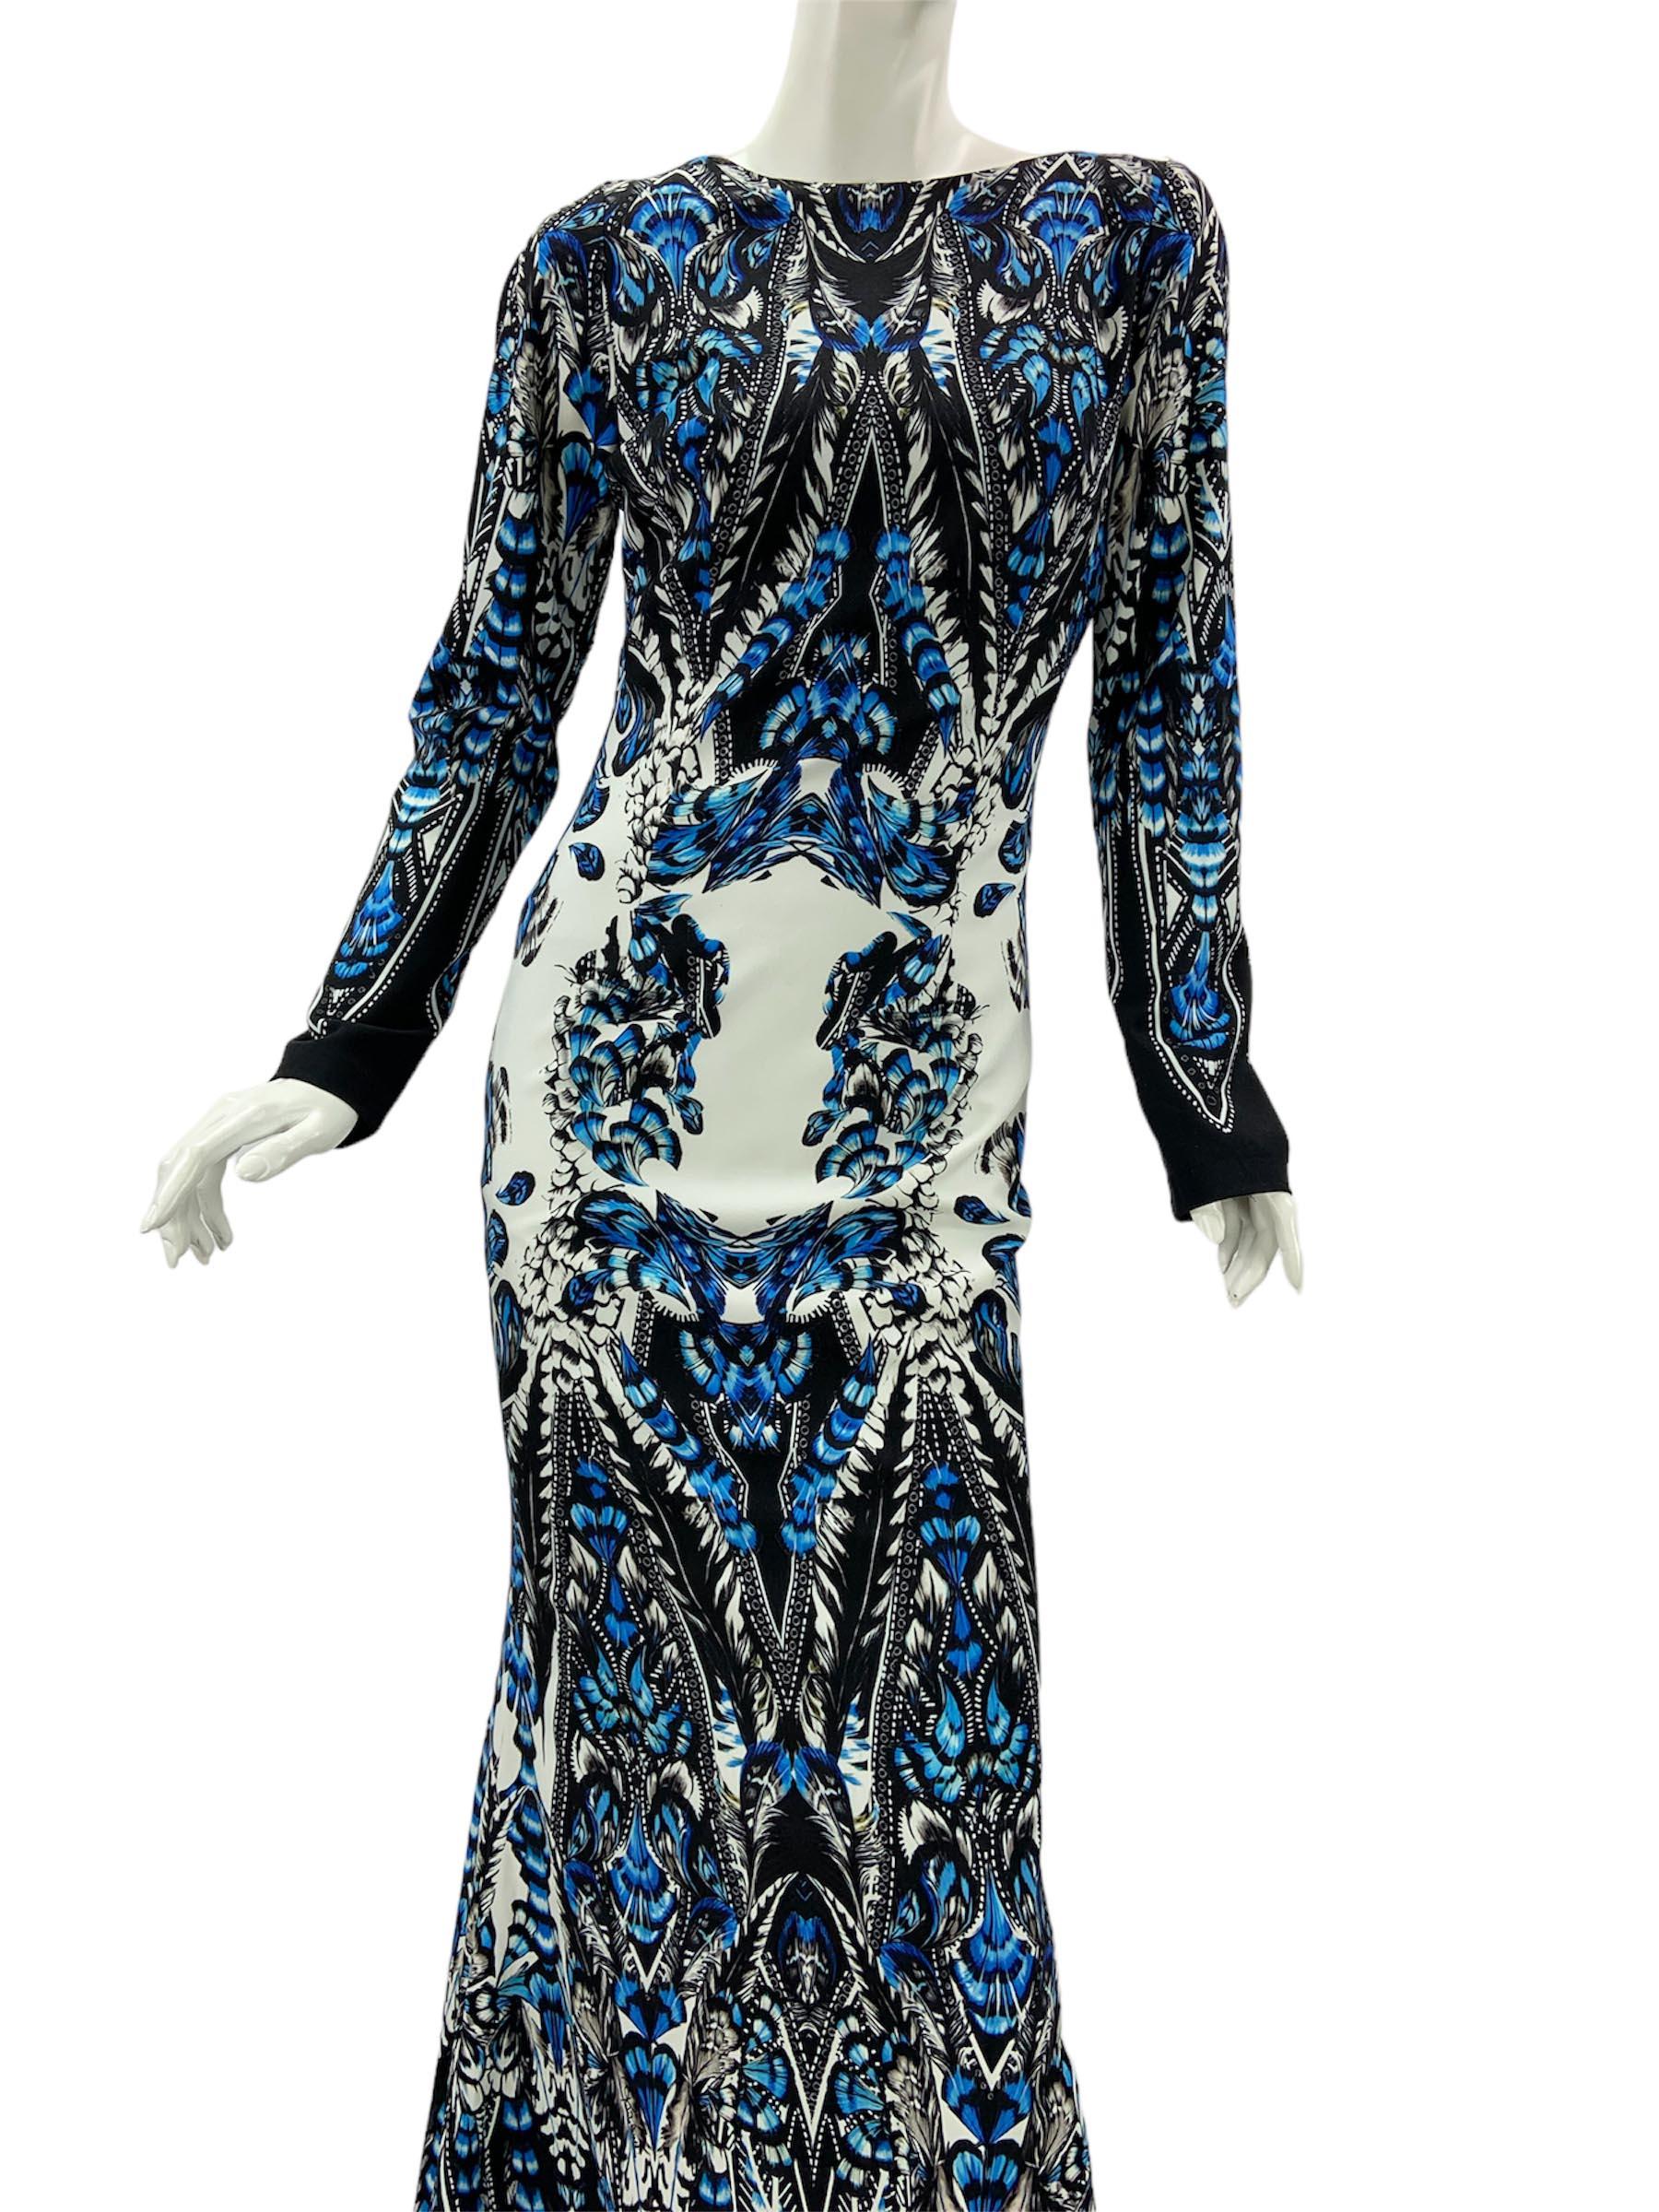 New Roberto Cavalli Feather Print Blue White Dress Gown Italian 36 For Sale 1